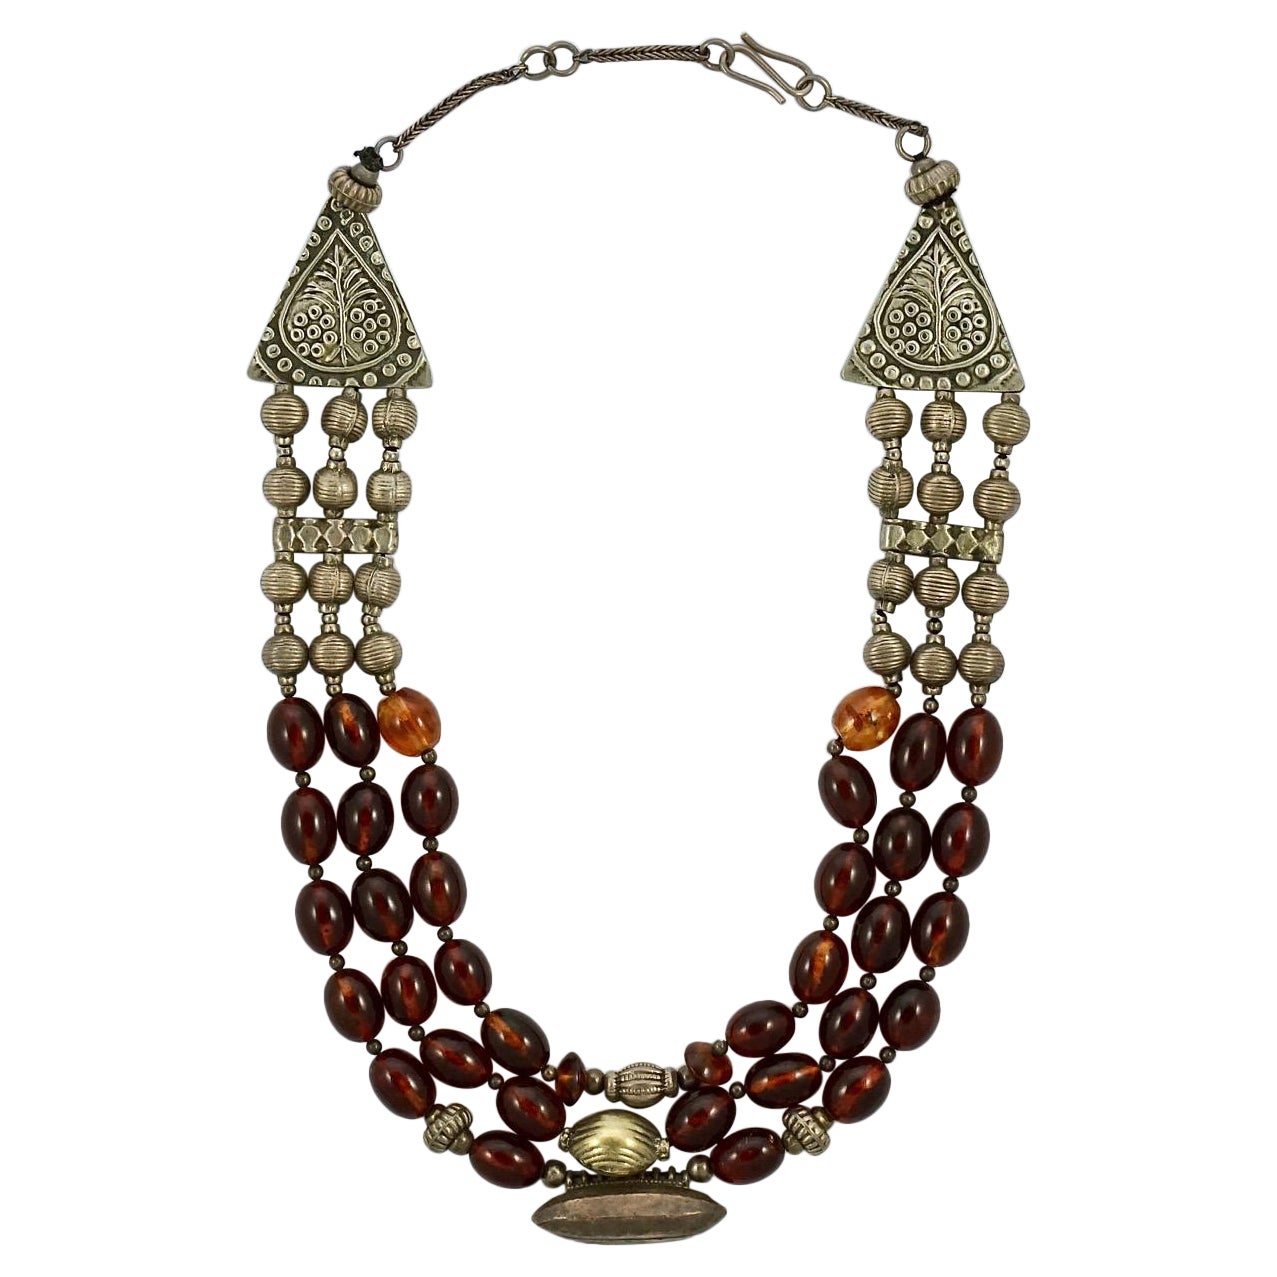 Hand Made Silver Tone and Triple Strand Polished Cognac Amber Bead Necklace